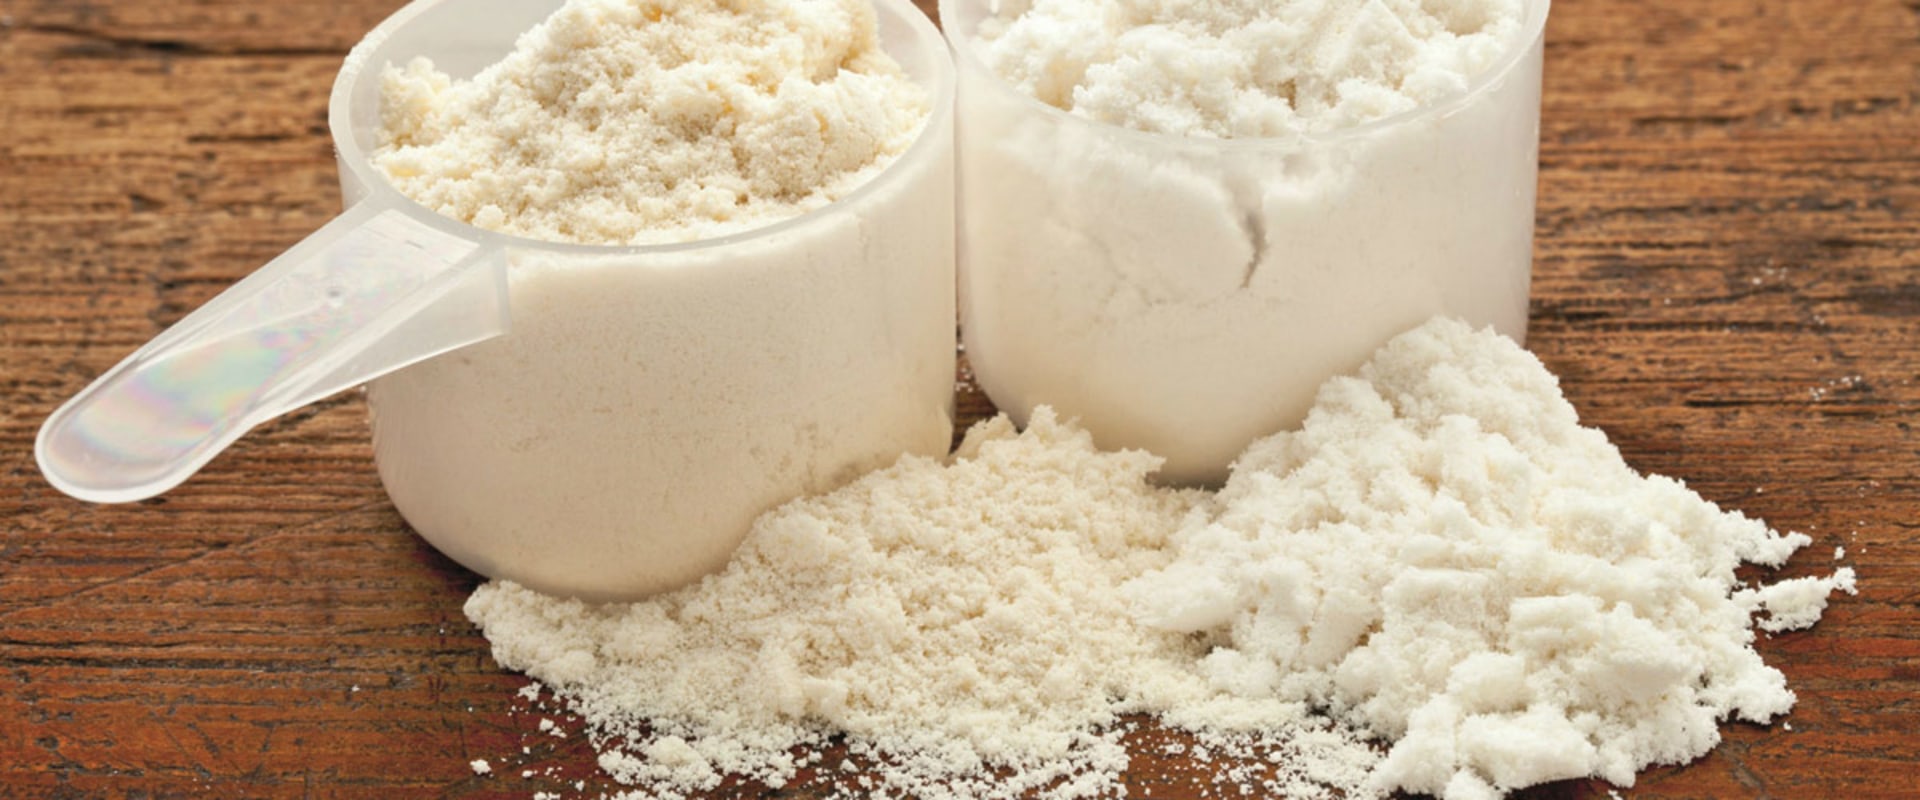 Can Lactose Intolerant People Take Whey Protein Safely? - A Comprehensive Guide